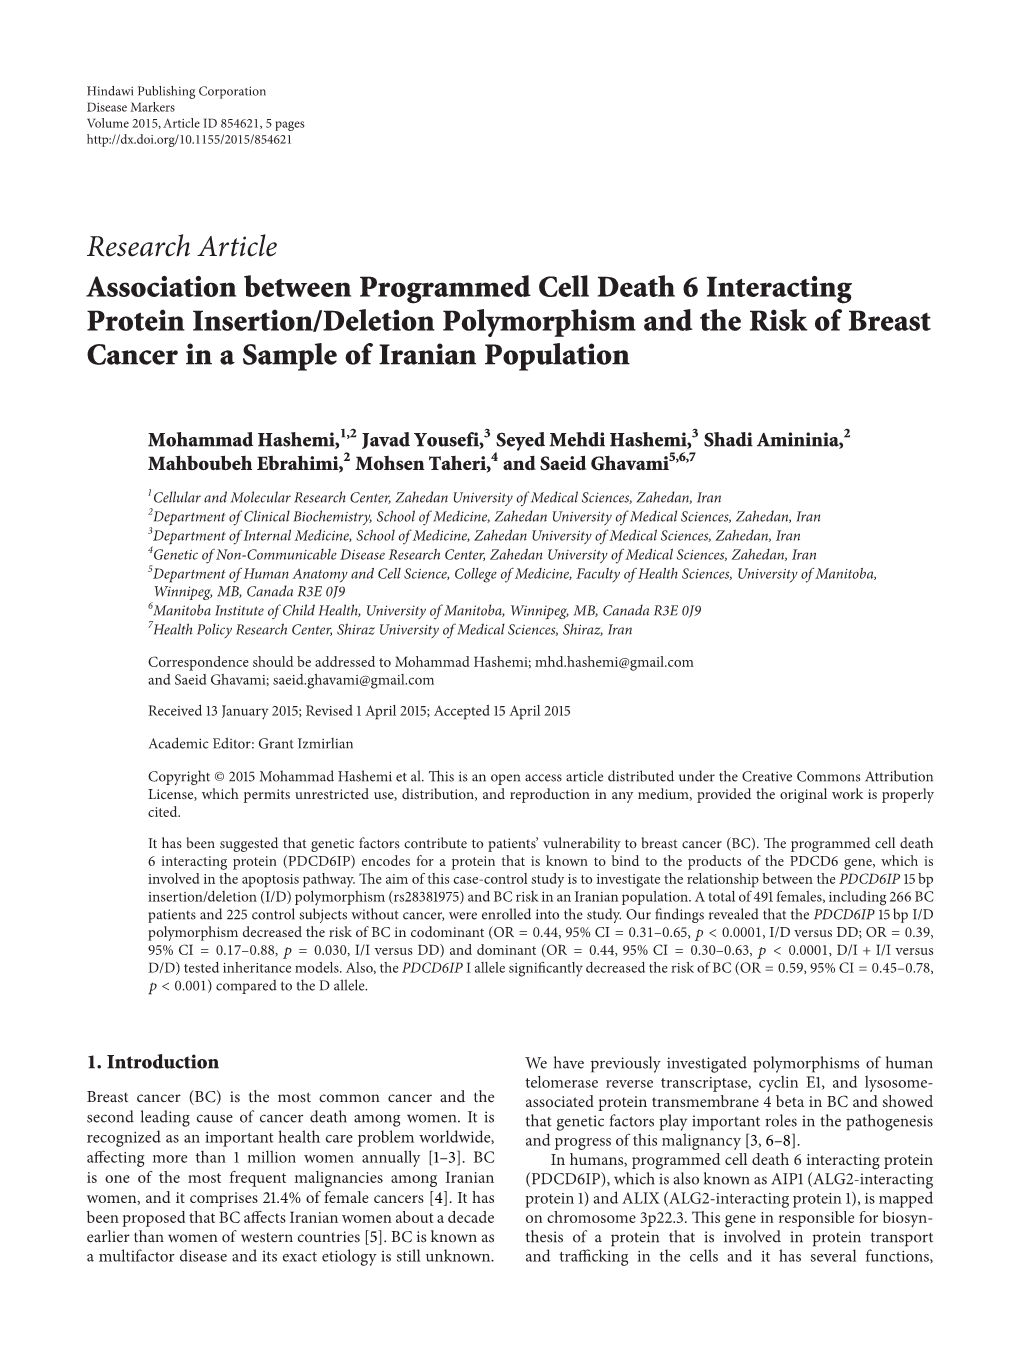 Association Between Programmed Cell Death 6 Interacting Protein Insertion/Deletion Polymorphism and the Risk of Breast Cancer in a Sample of Iranian Population